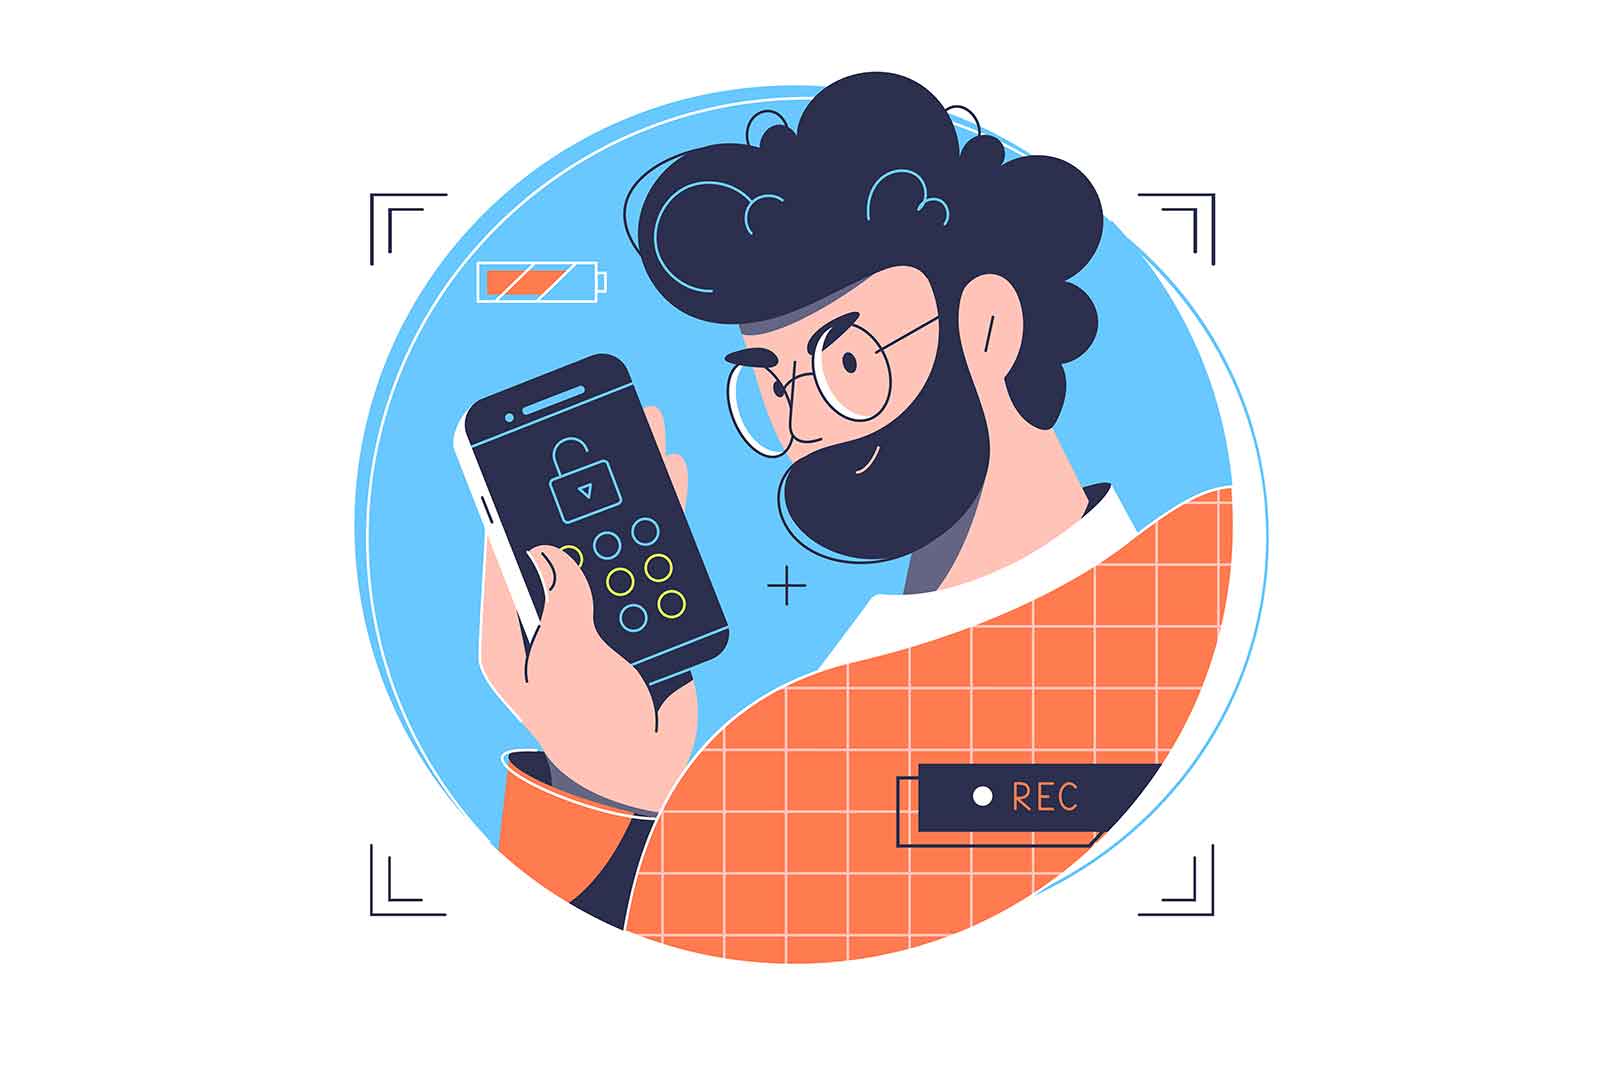 Man looking on locked phone screen with password request, vector illustration. Security and personal data safety concept.